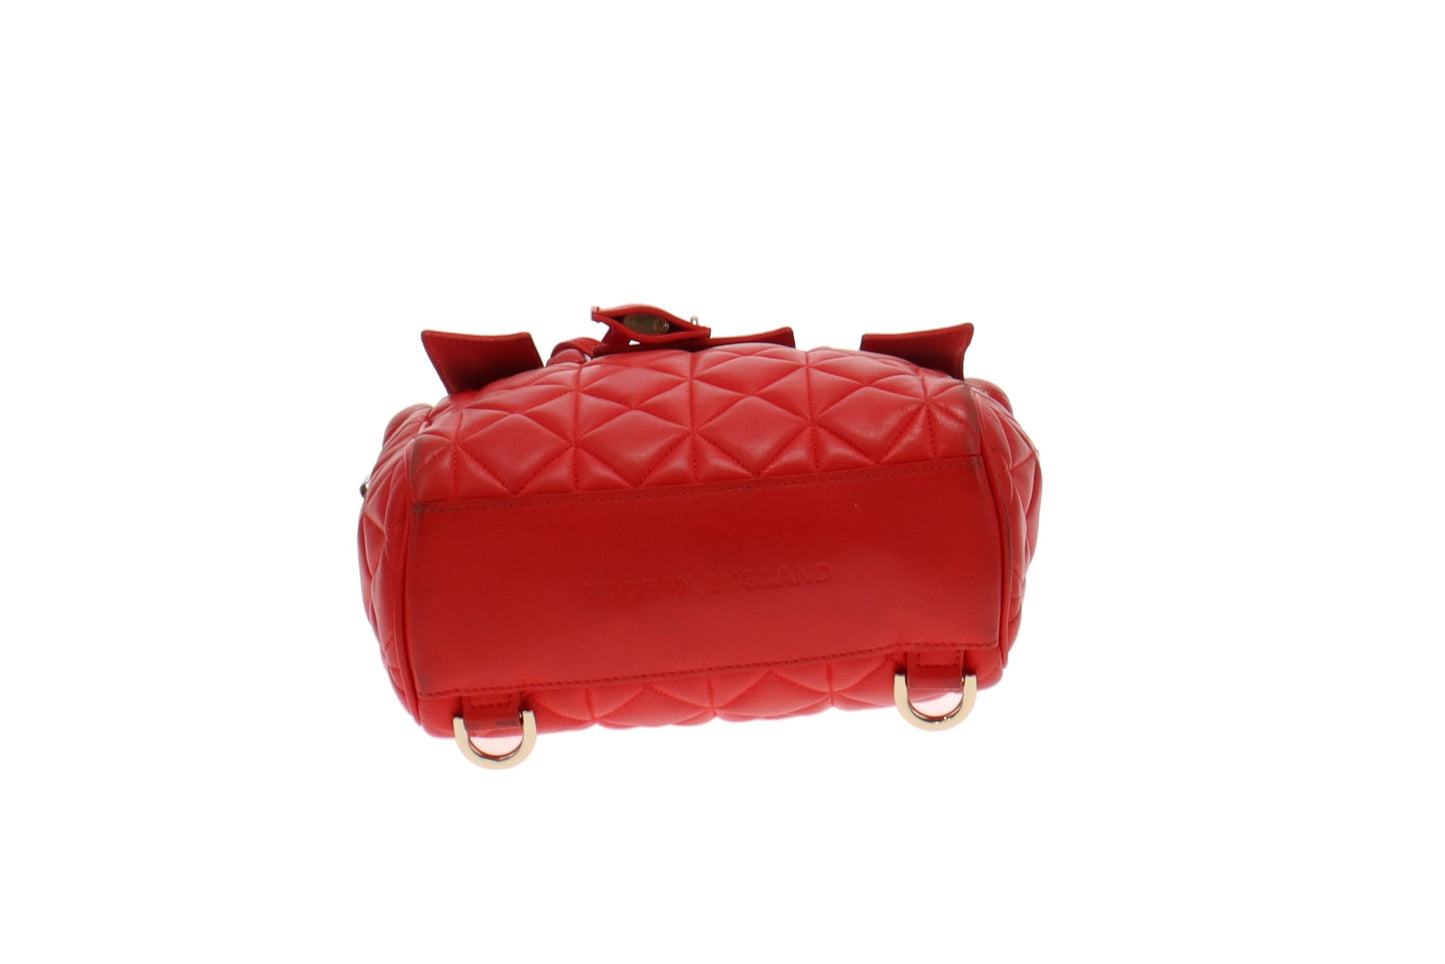 Mulberry Red Quilted Leather Cara Delevigne Backpack